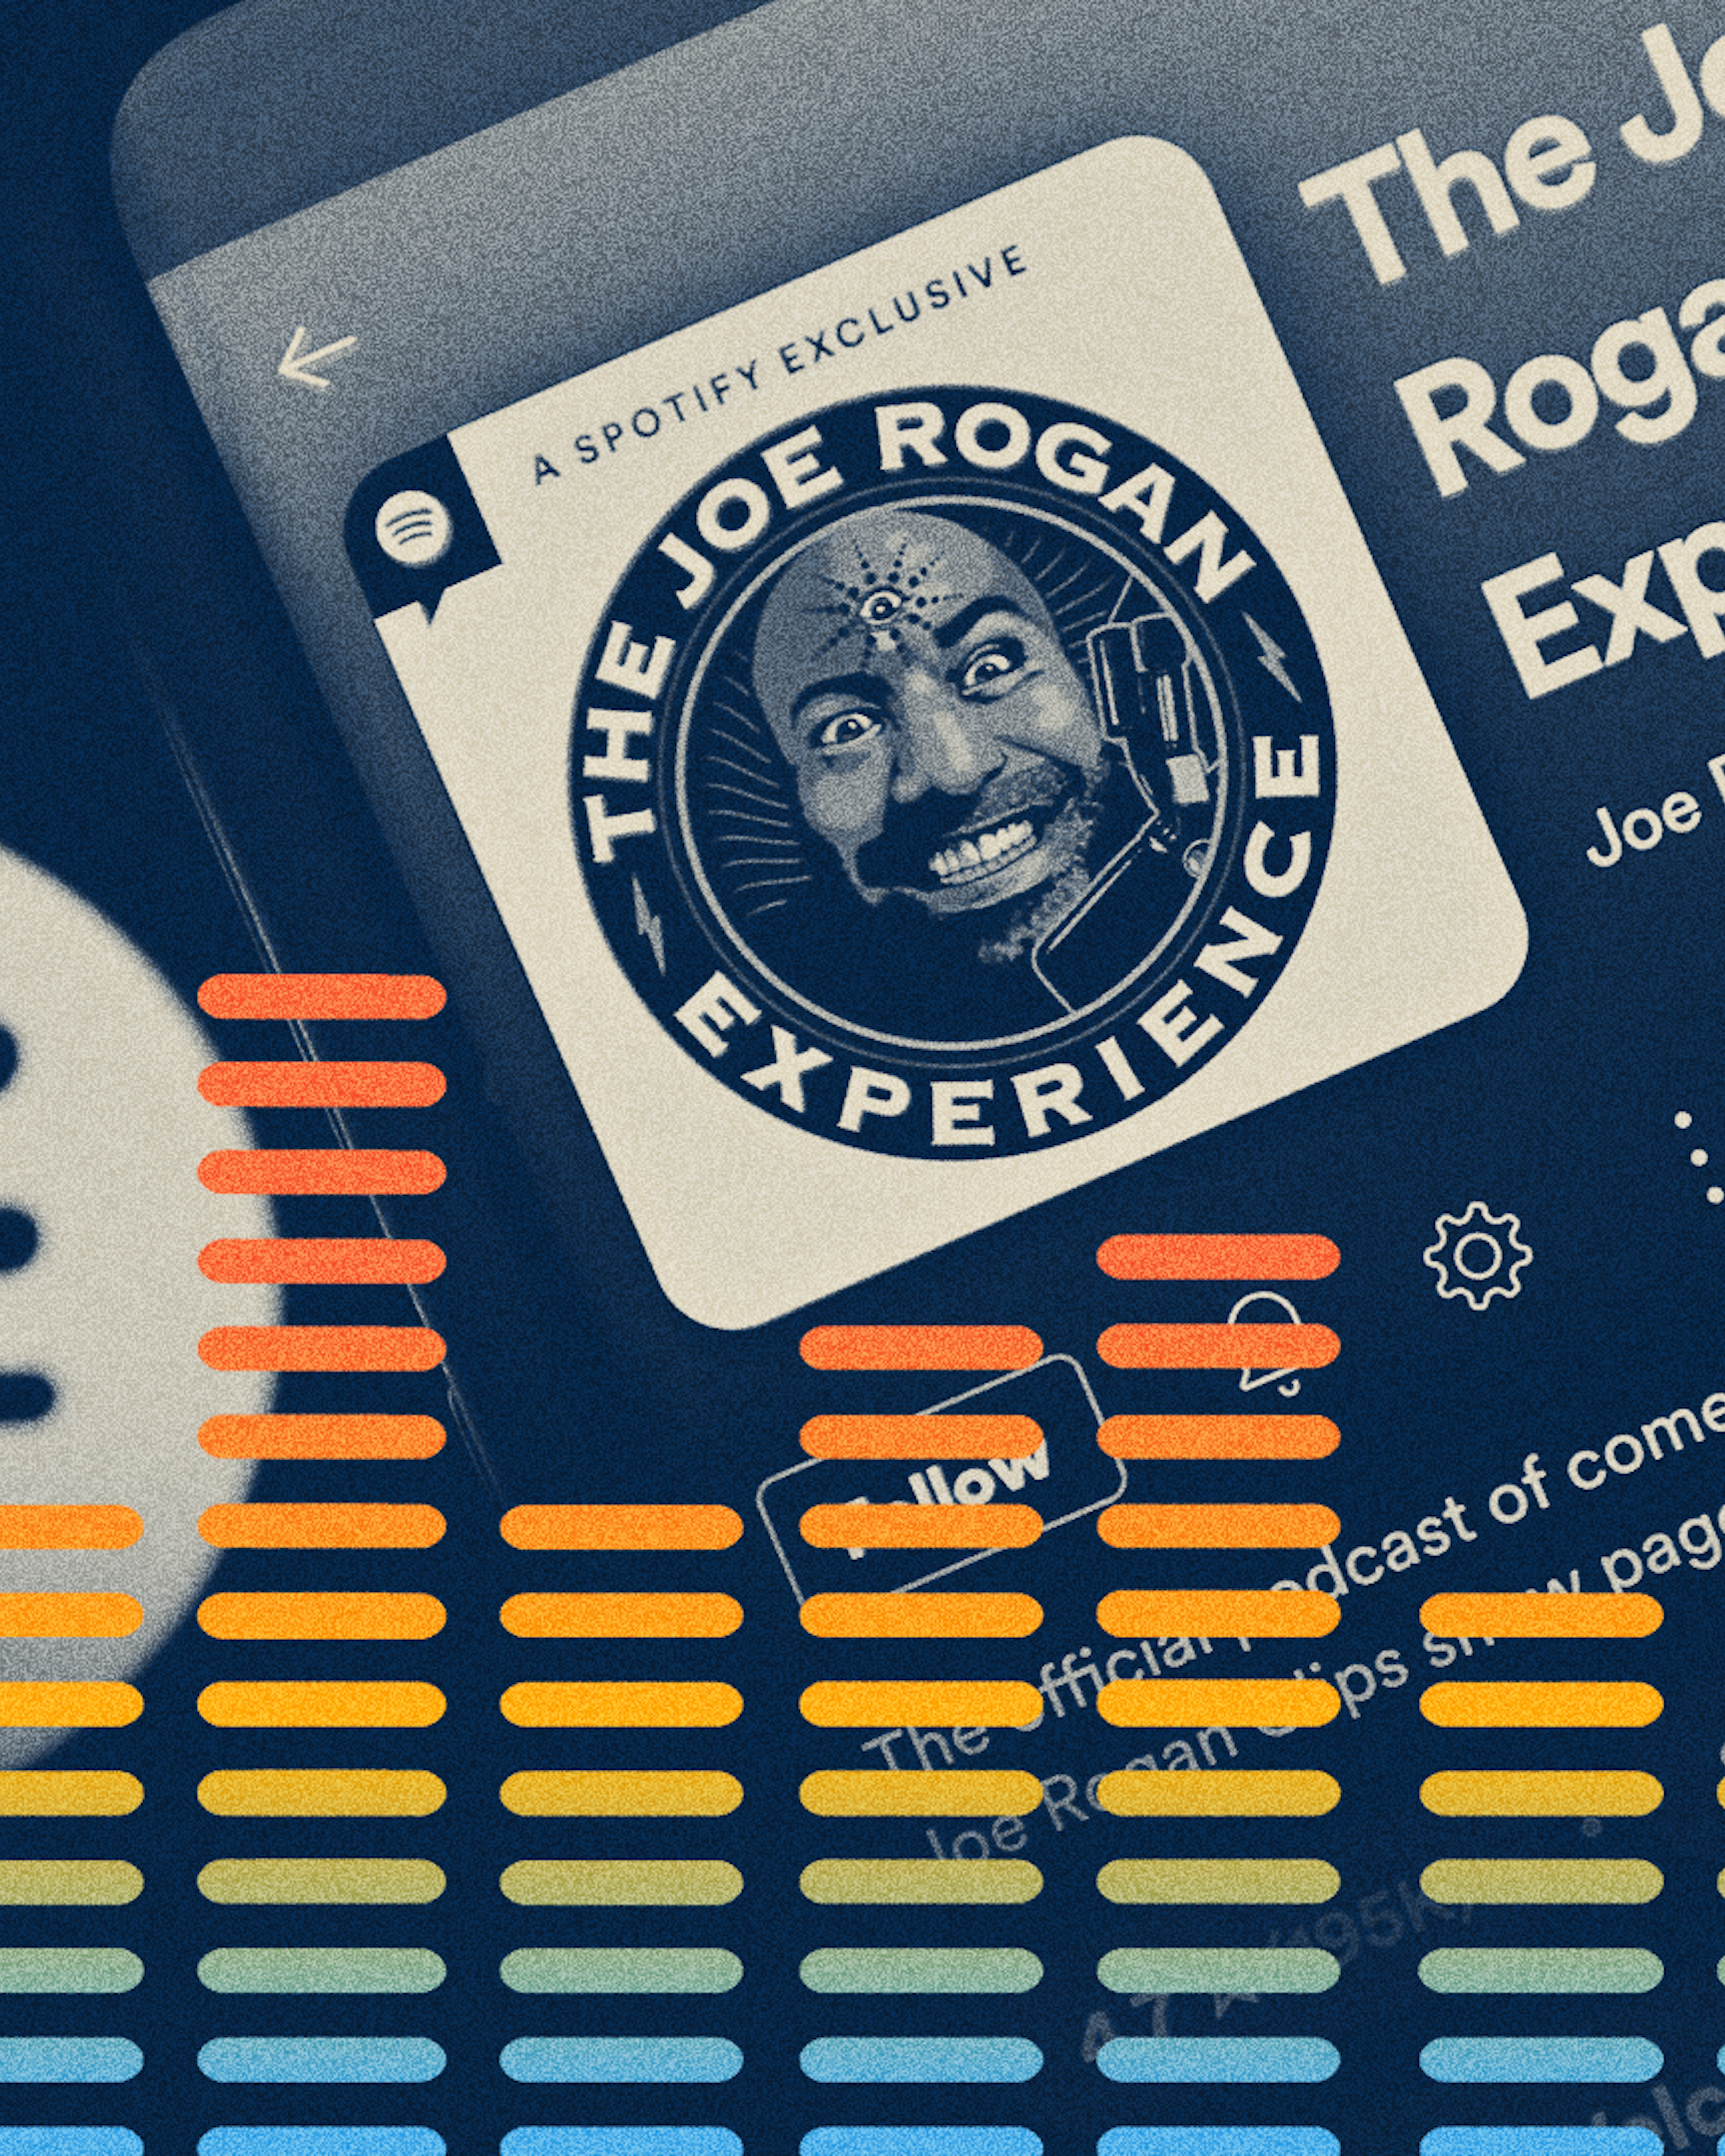 Spotify Hosts The Joe Rogan Experience Podcast NEW YORK, NEW YORK - JANUARY 31: In this photo illustration, "The Joe Rogan Experience" podcast is viewed on Spotify's mobile app on January 31, 2022 in New York City. Several artists recently removed their music from Spotify in protest of hosting Joe Rogan's podcast. (Photo Illustration by Cindy Ord/Getty Images) Cindy Ord / Staff